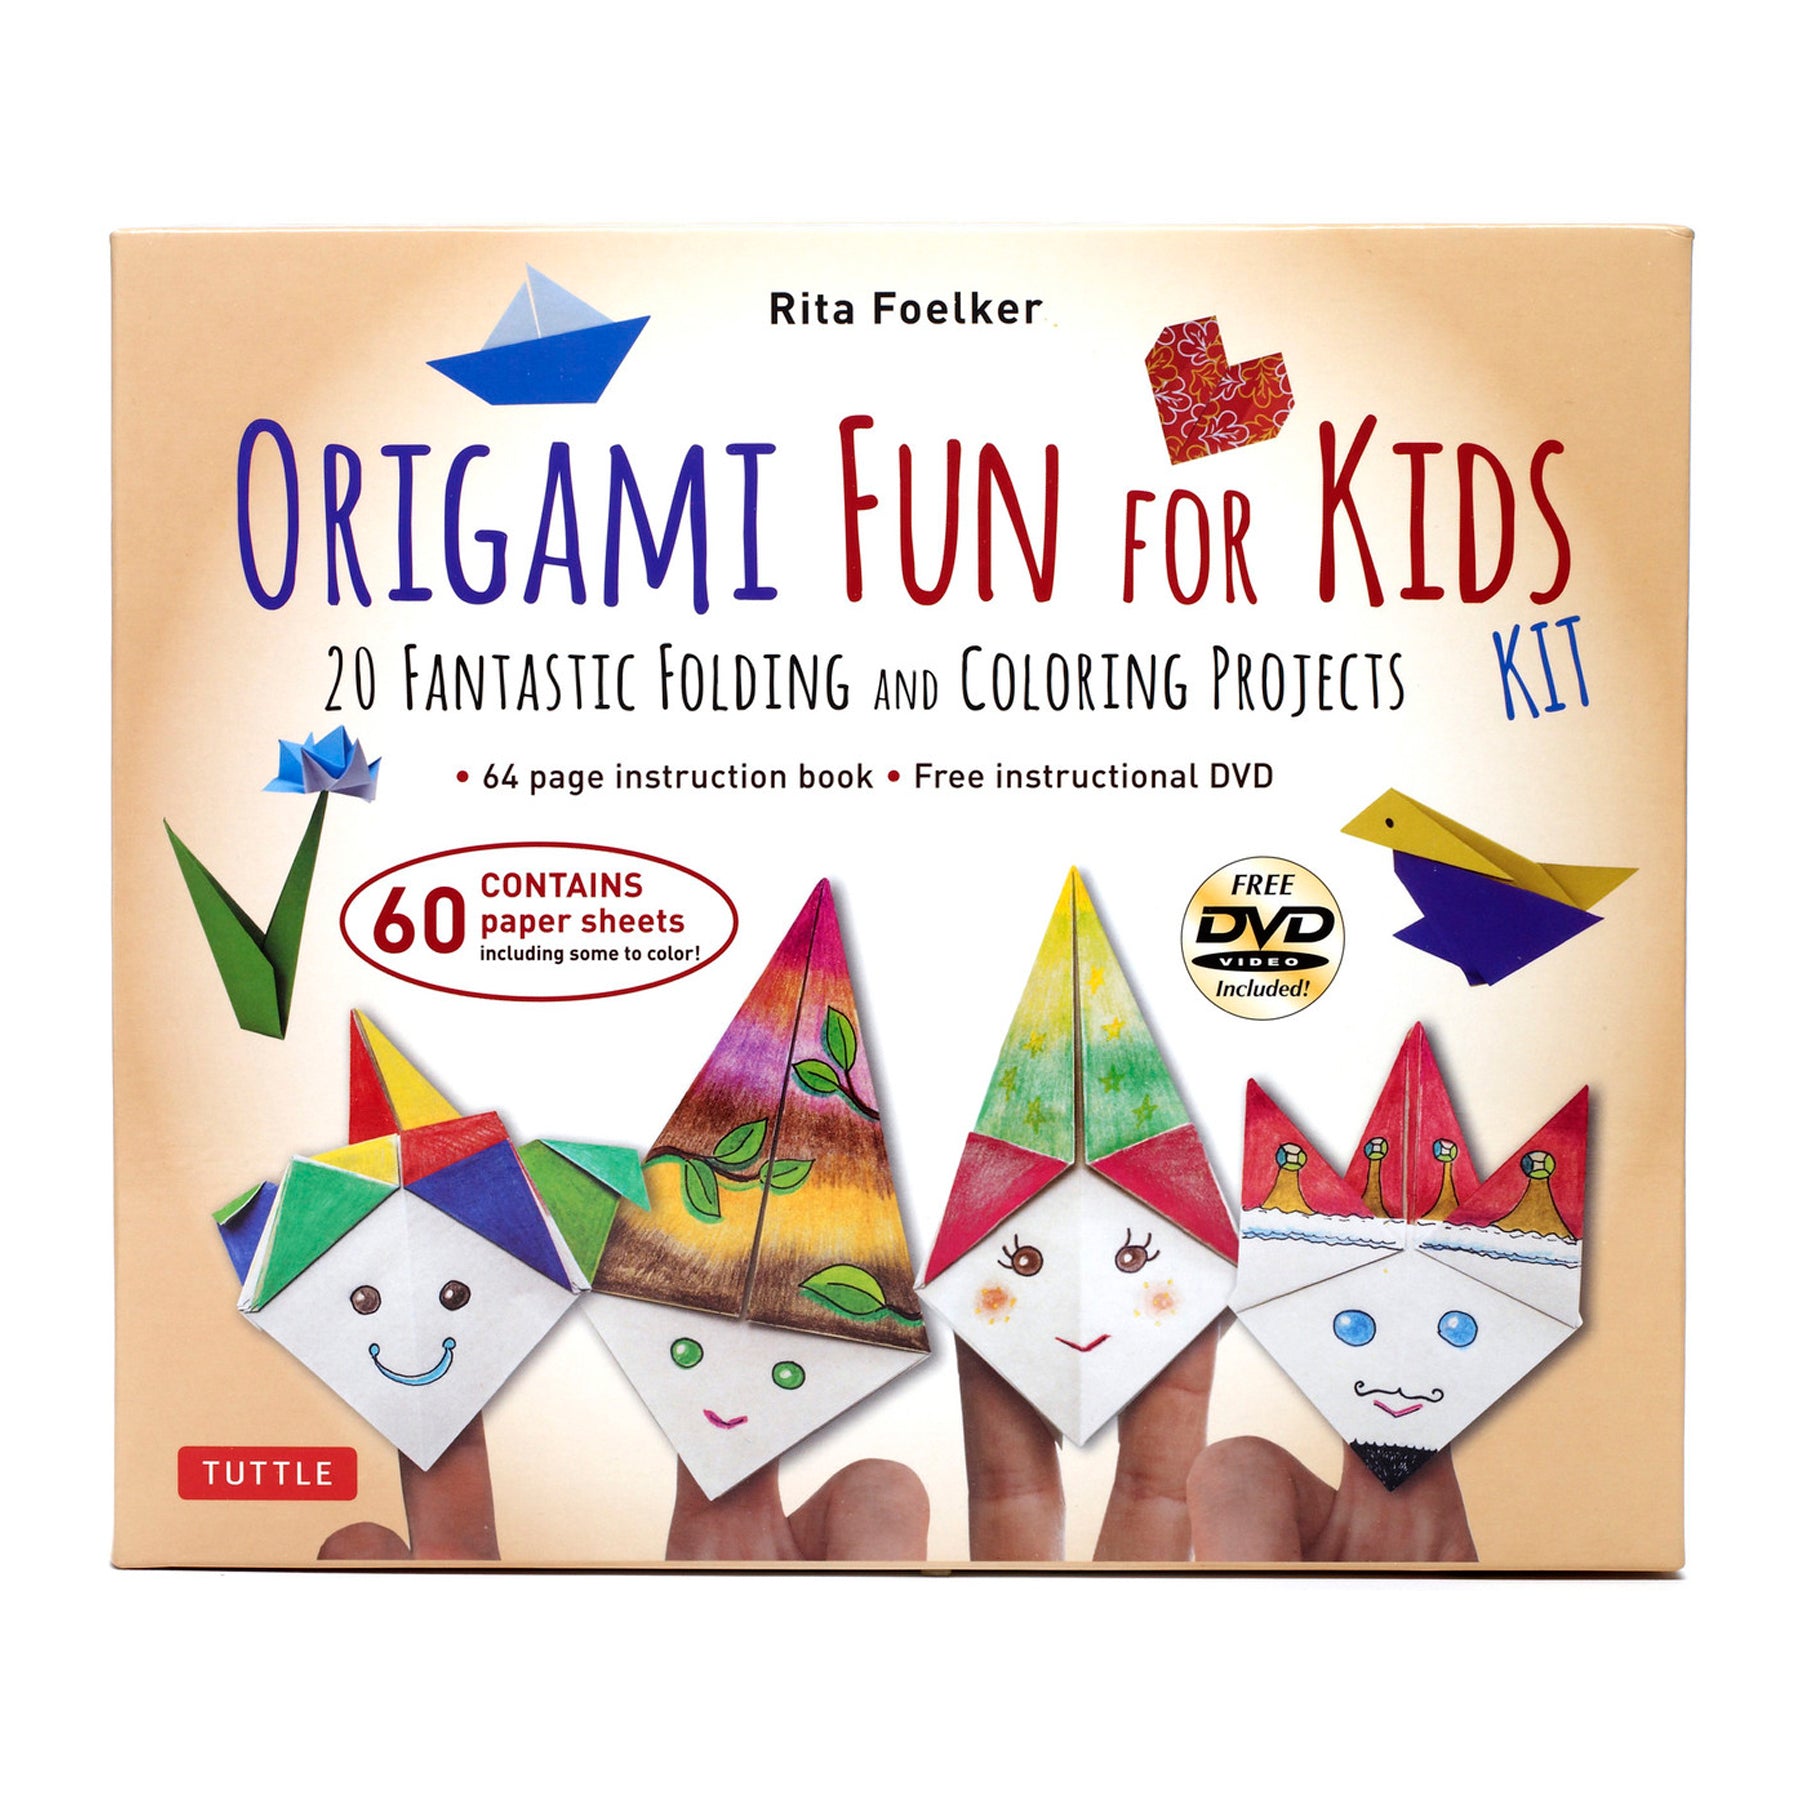 My First Origami Kit - The Walters Art Museum